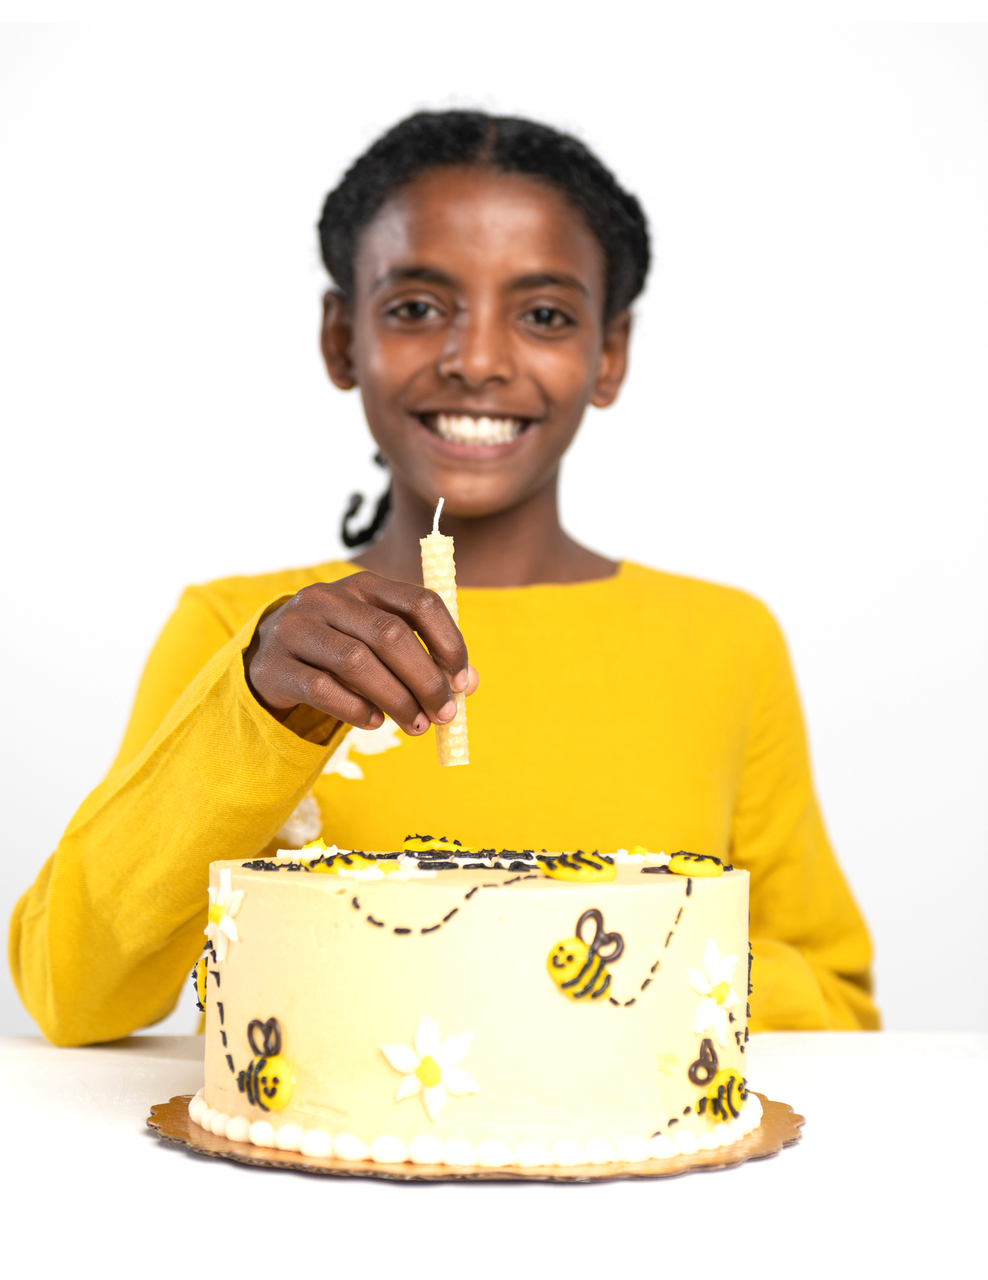 Kid holding a beeswax candle over a cake